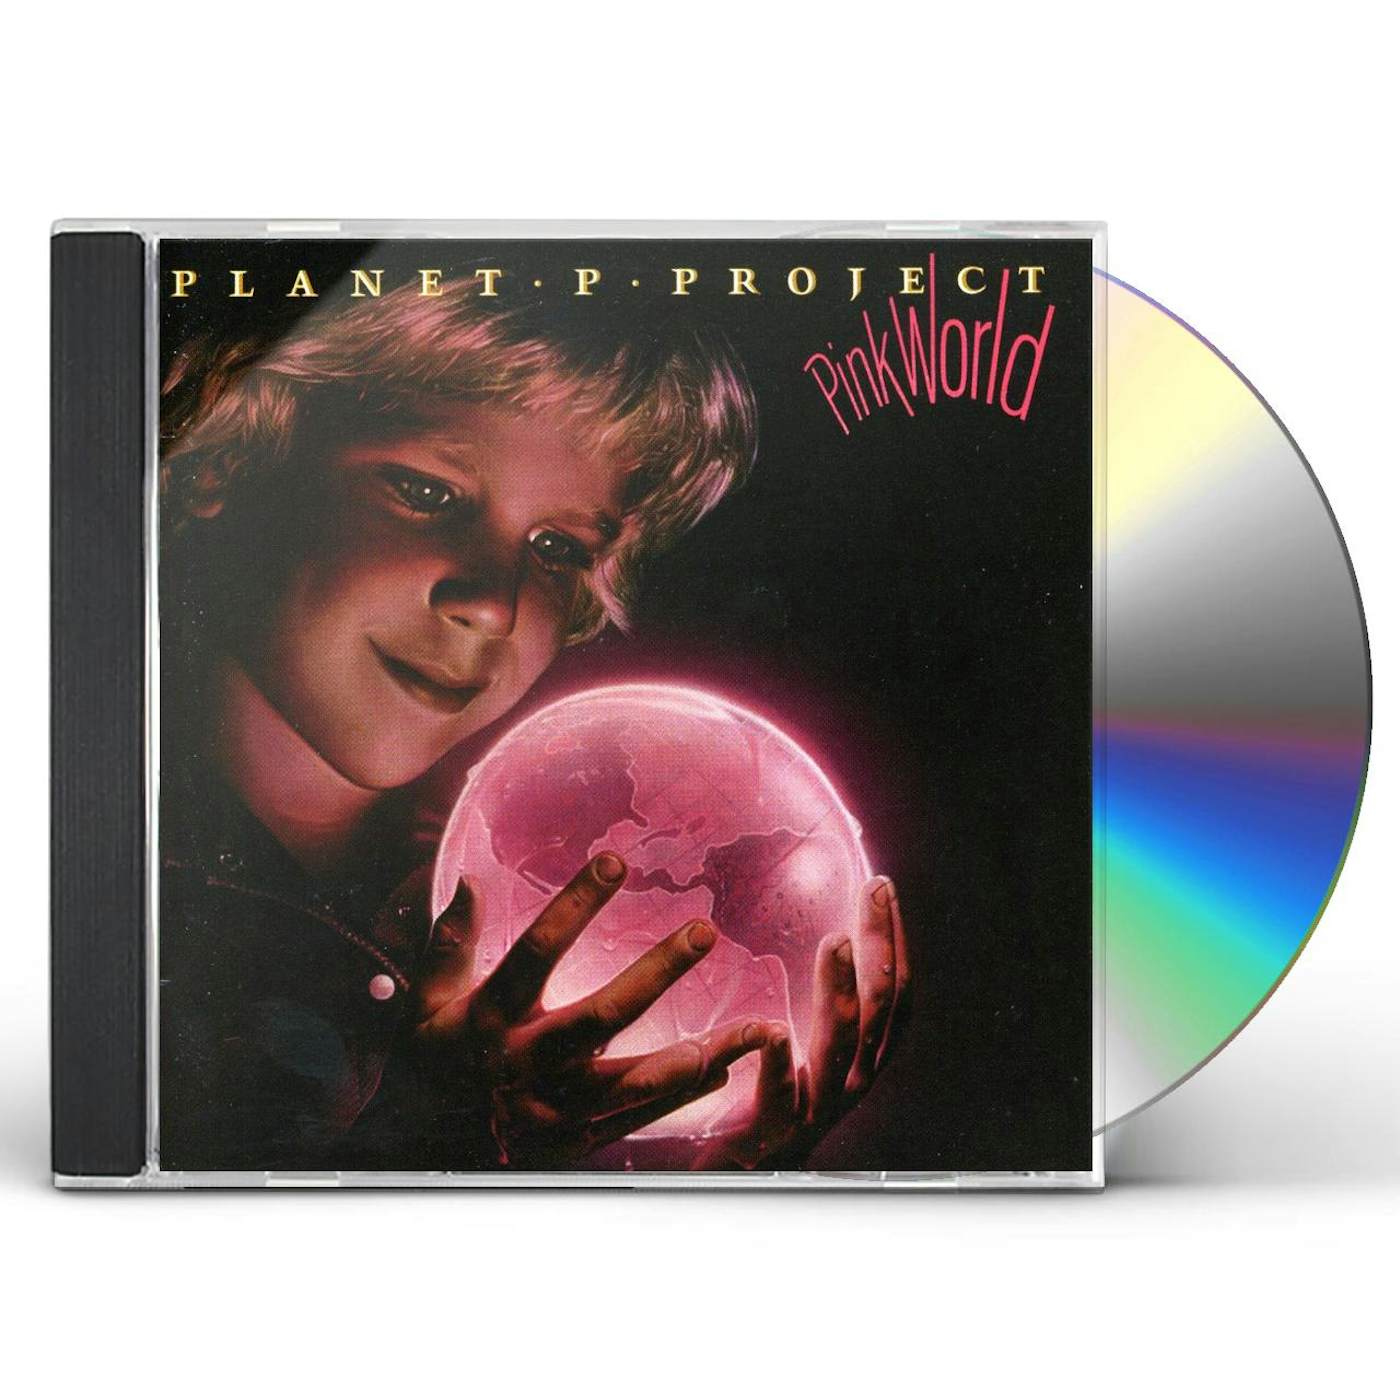 Planet P Project PINK WORLD CD